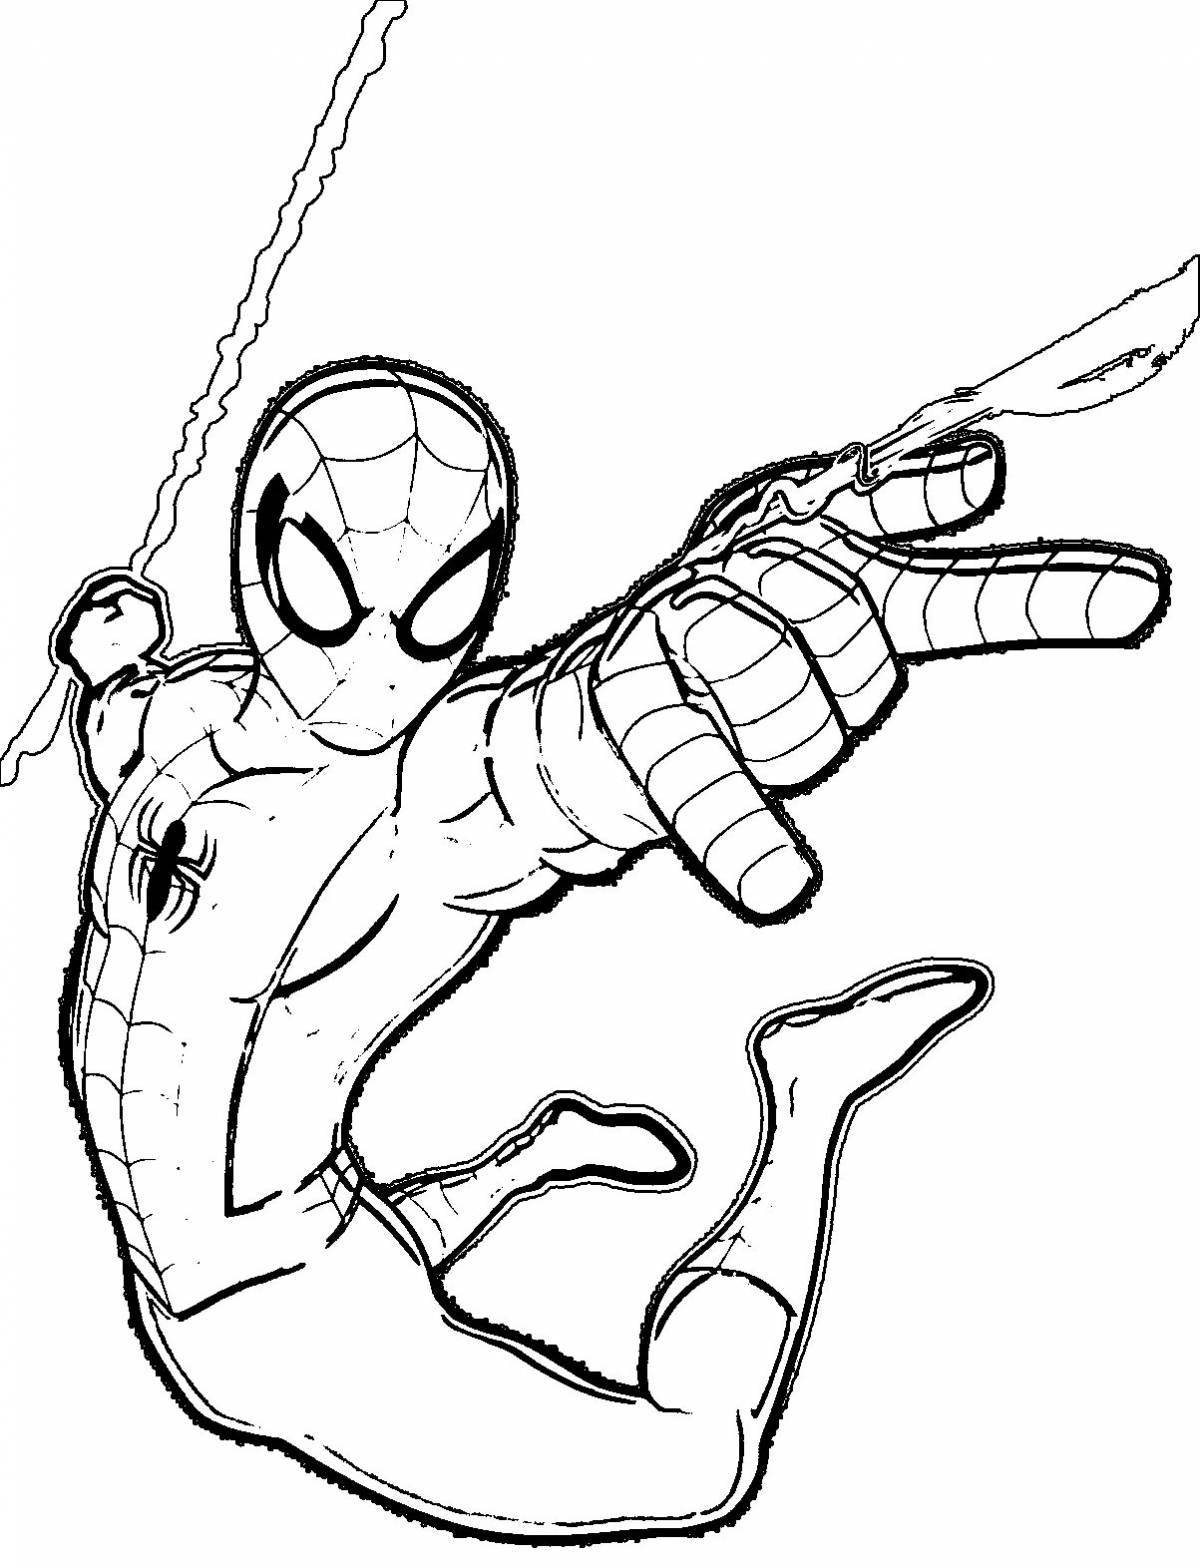 Spider-Man's Outstanding Christmas Coloring Page